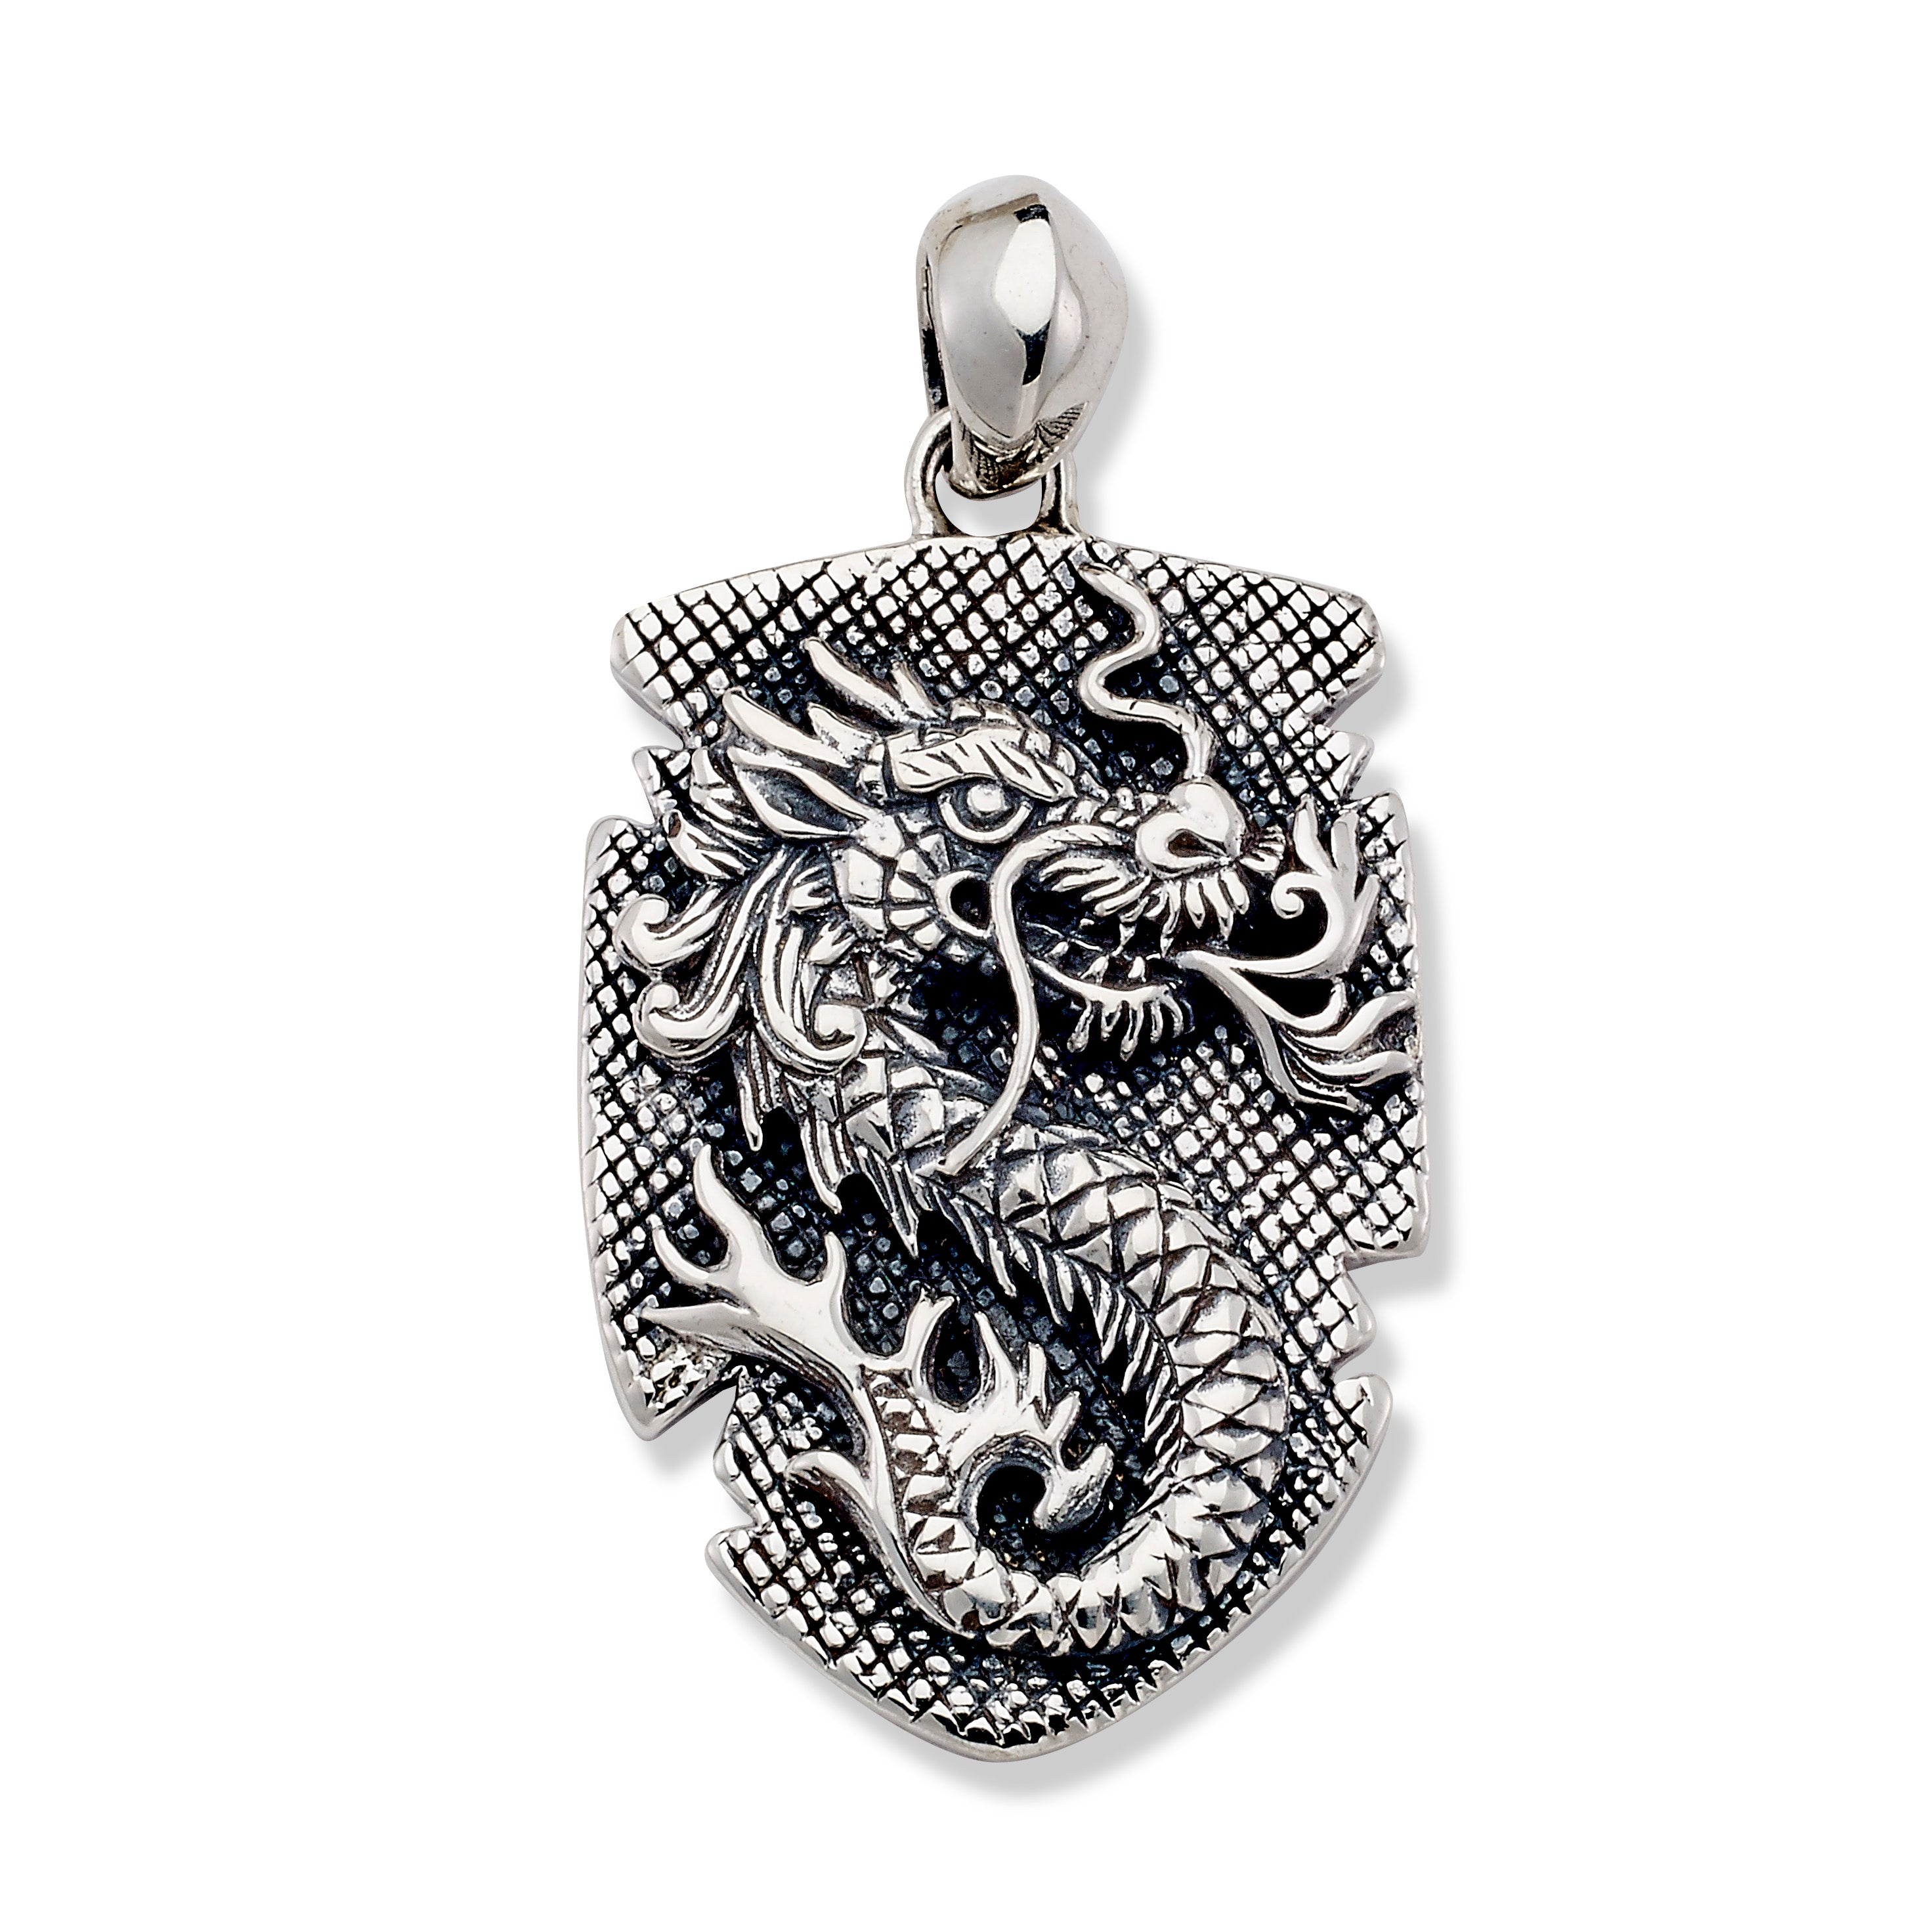 New Samuel B 18K Gold and Sterling Silver Lion Tiger Panther Pendant  Necklace | eBay